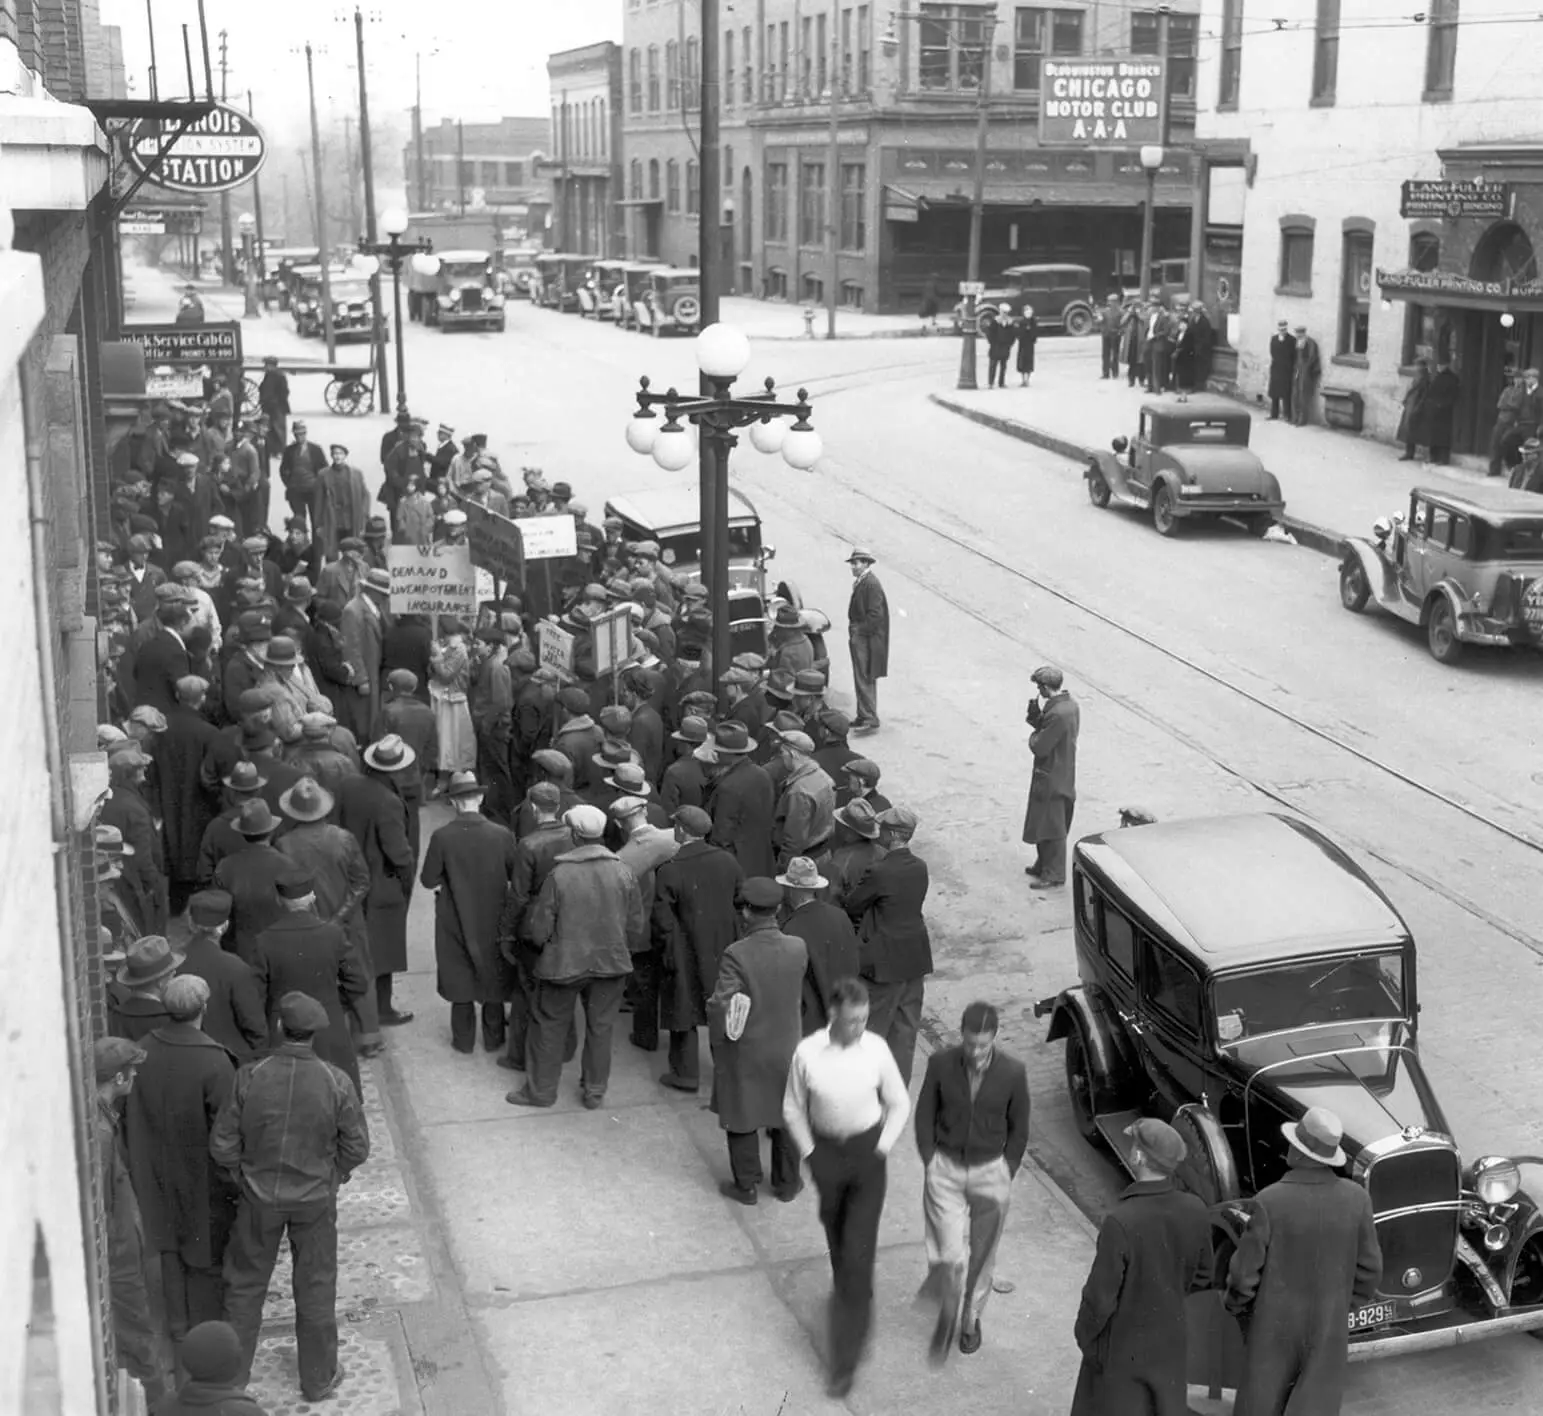 Photograph of a crowd of people on the sidewalk. Almost everyone is wearing hats and long coats. Some appear to be waiting in a line, while others are picketing holding signs.